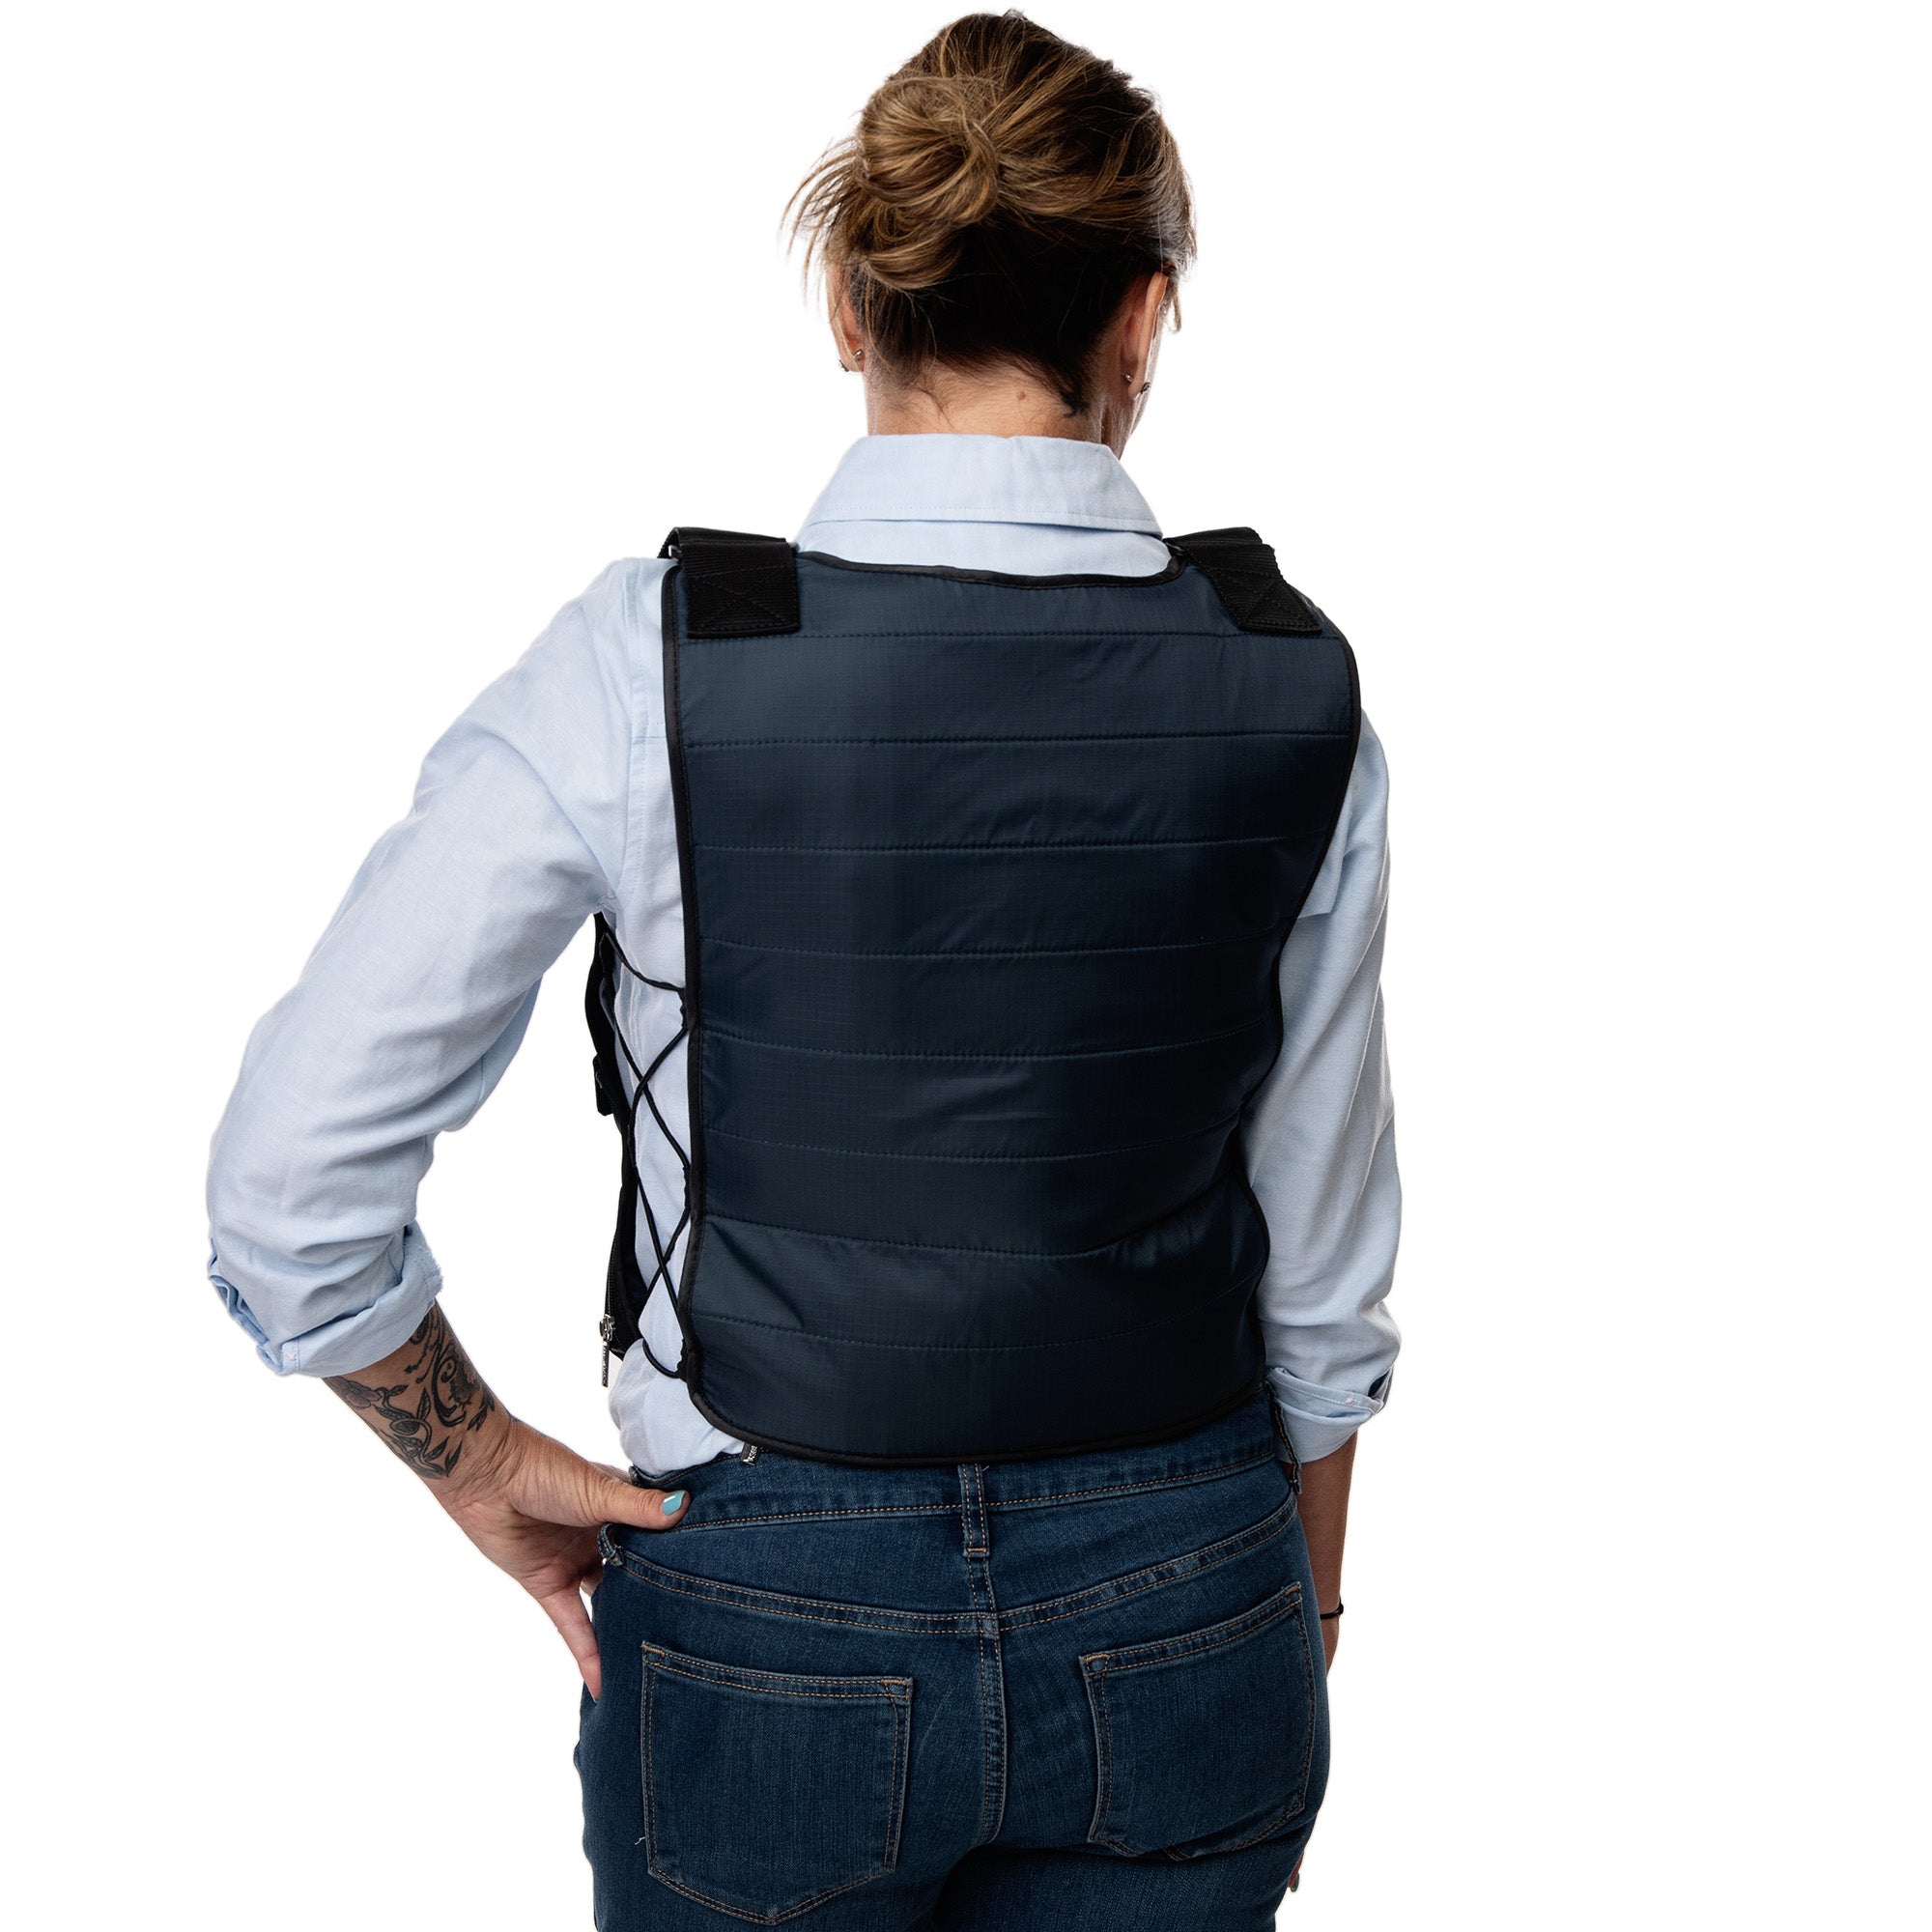 FlexiFreeze Ice Vest - Personal Cooling Cold Vest for Heat Relief, Navy